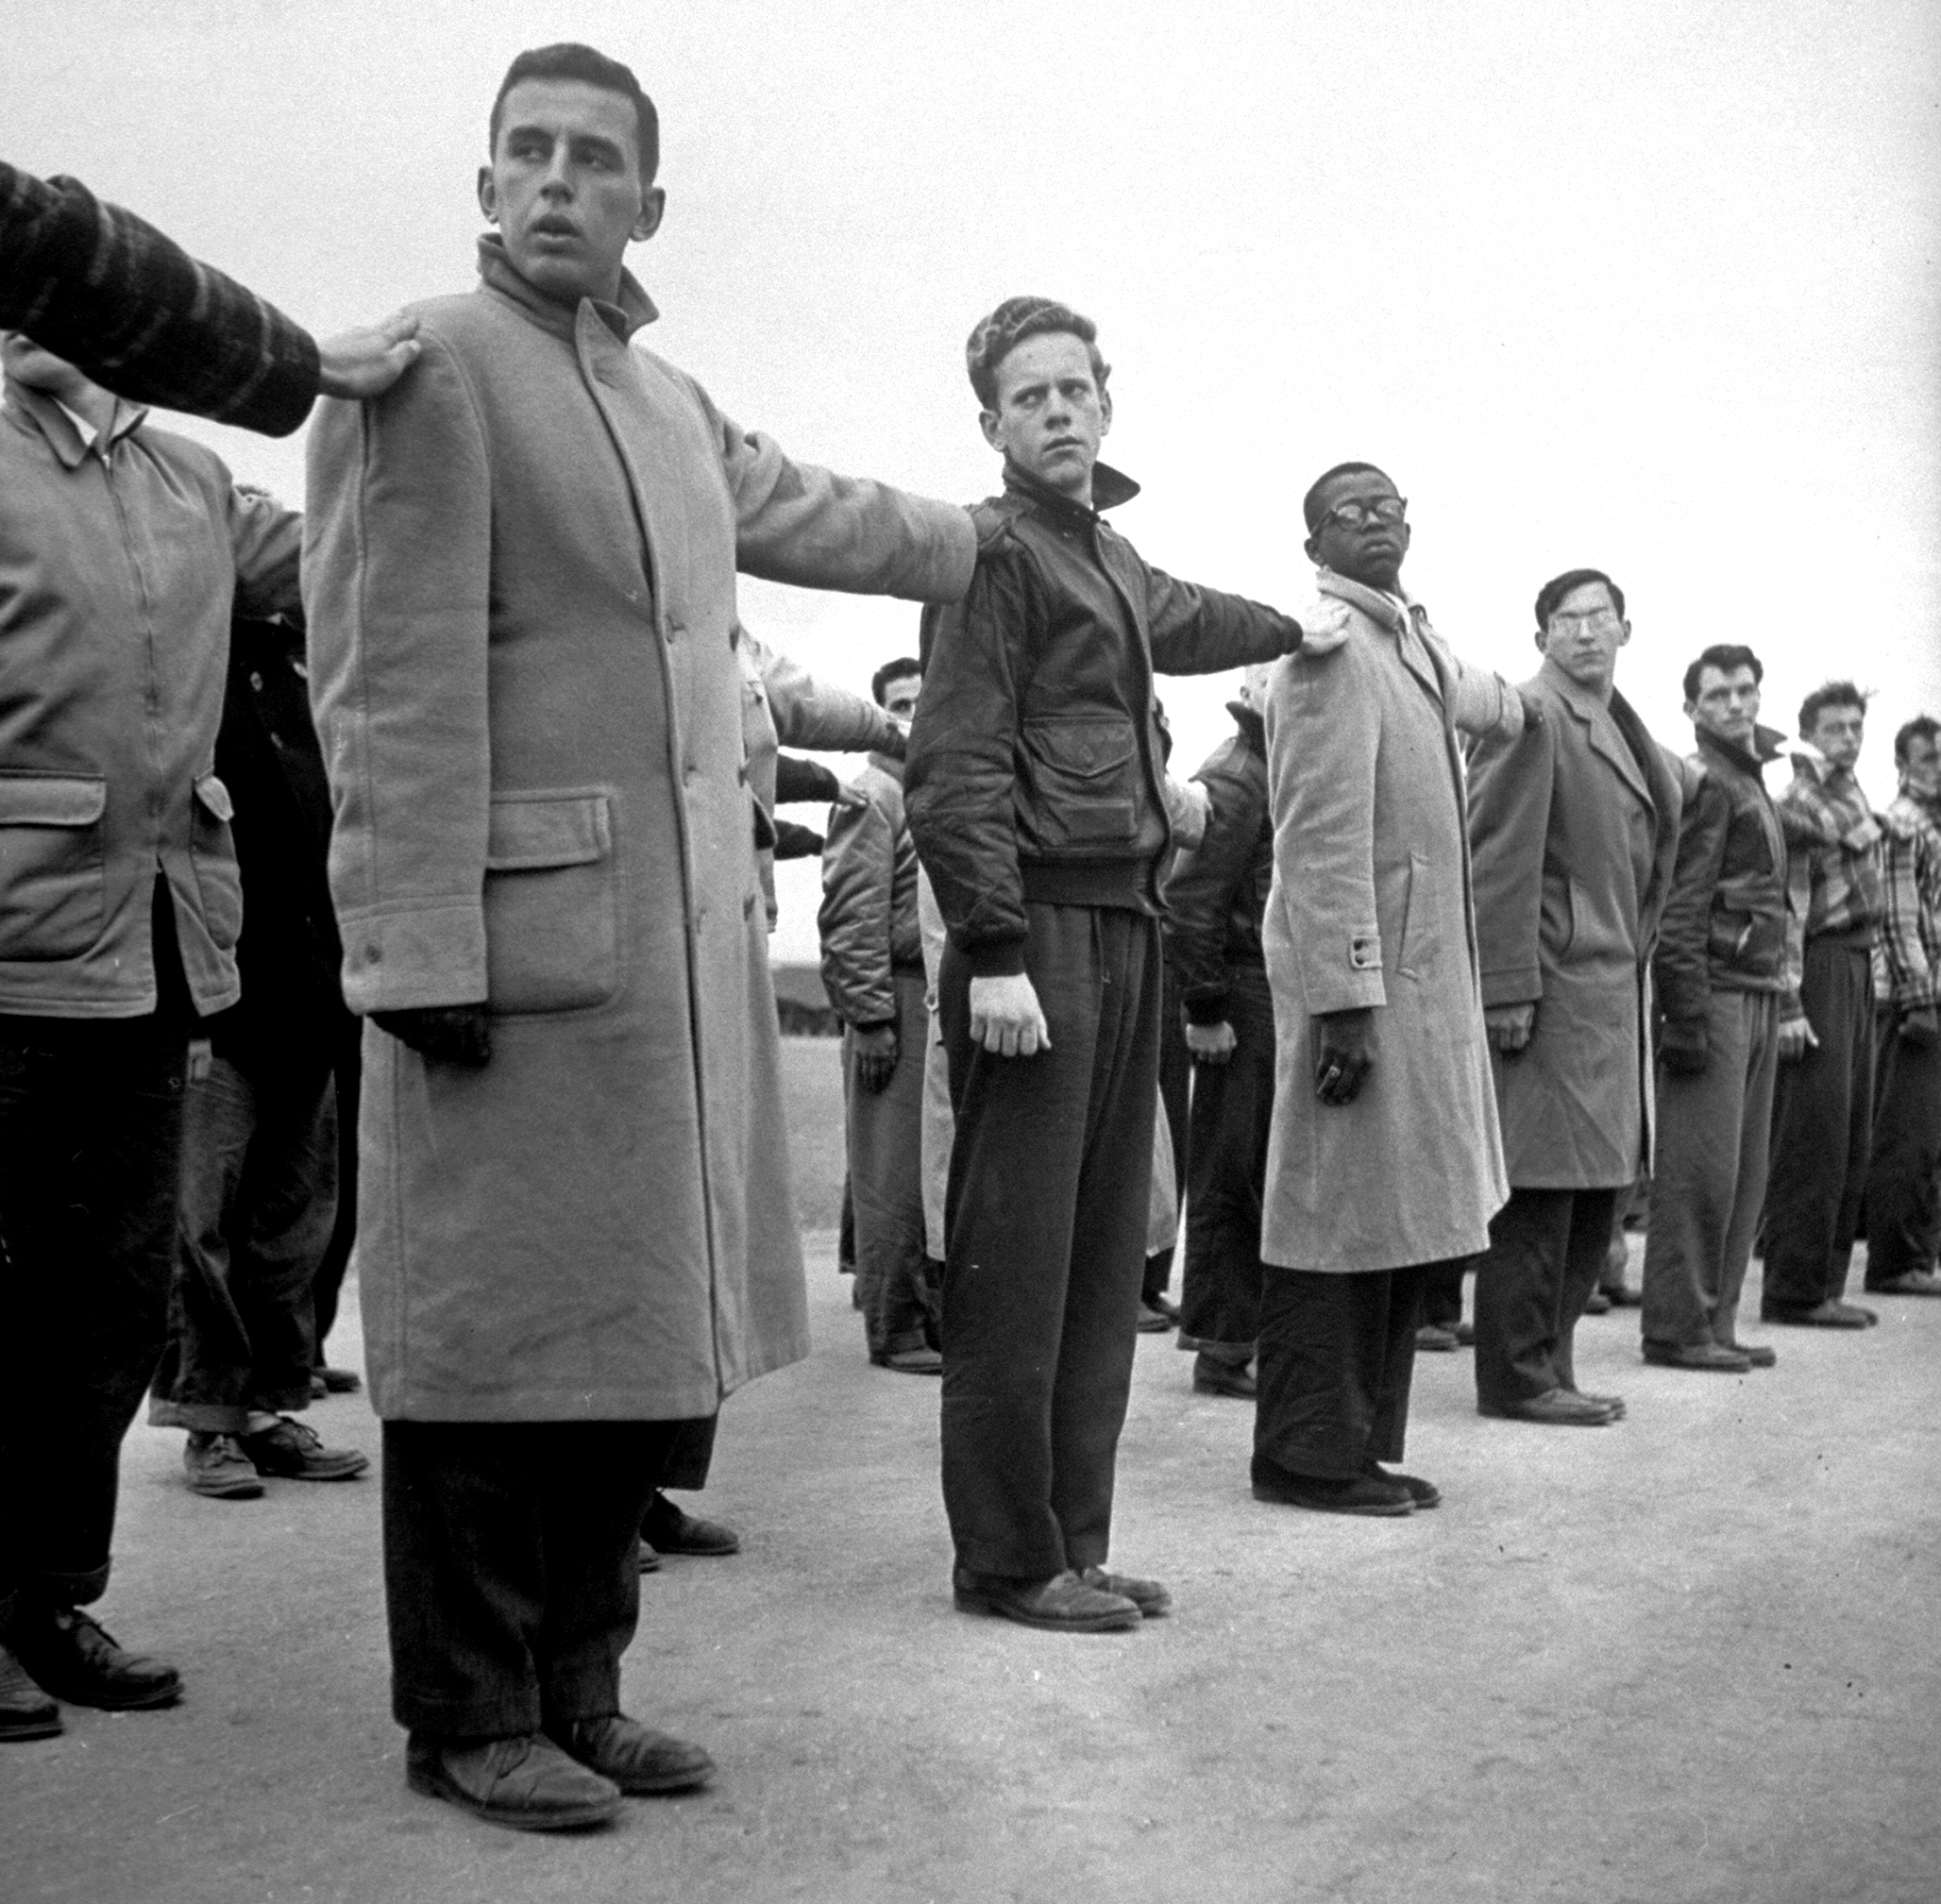 Air force recruits at the Lackland Air Force base in Texas, 1951.